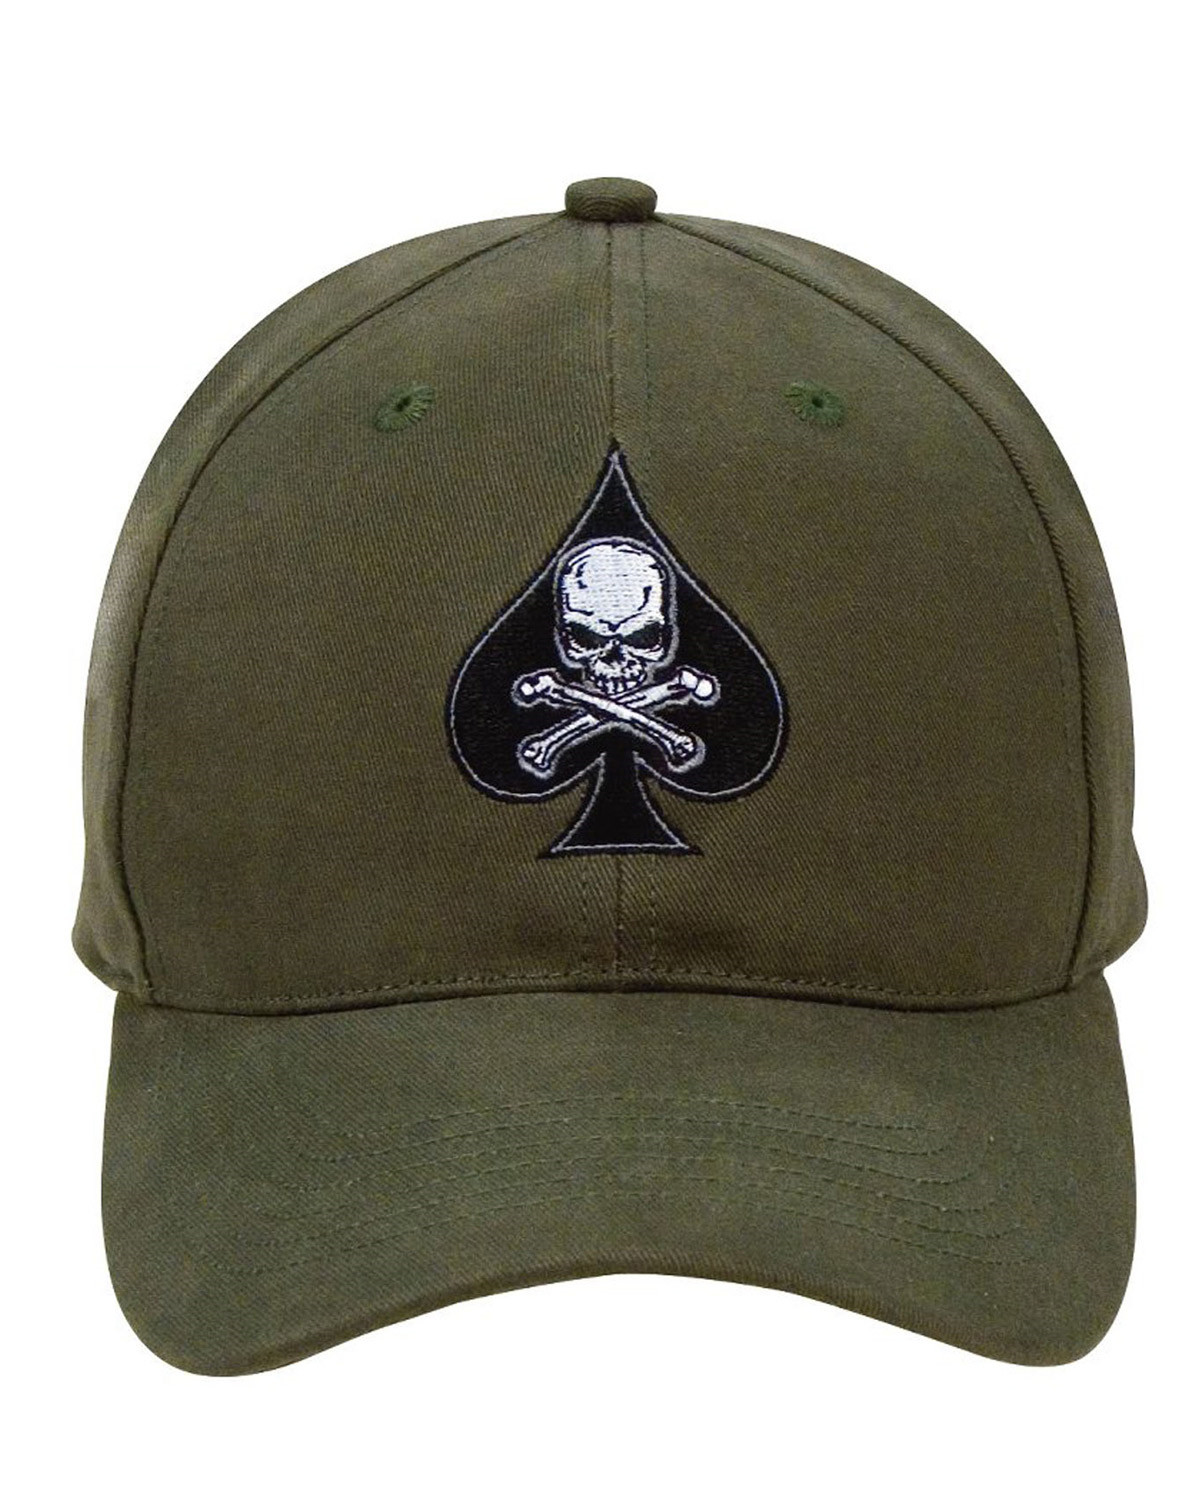 Rothco Black Ink Death Spade Low Profile Insignia Cap Olive (Oliven, One Size)